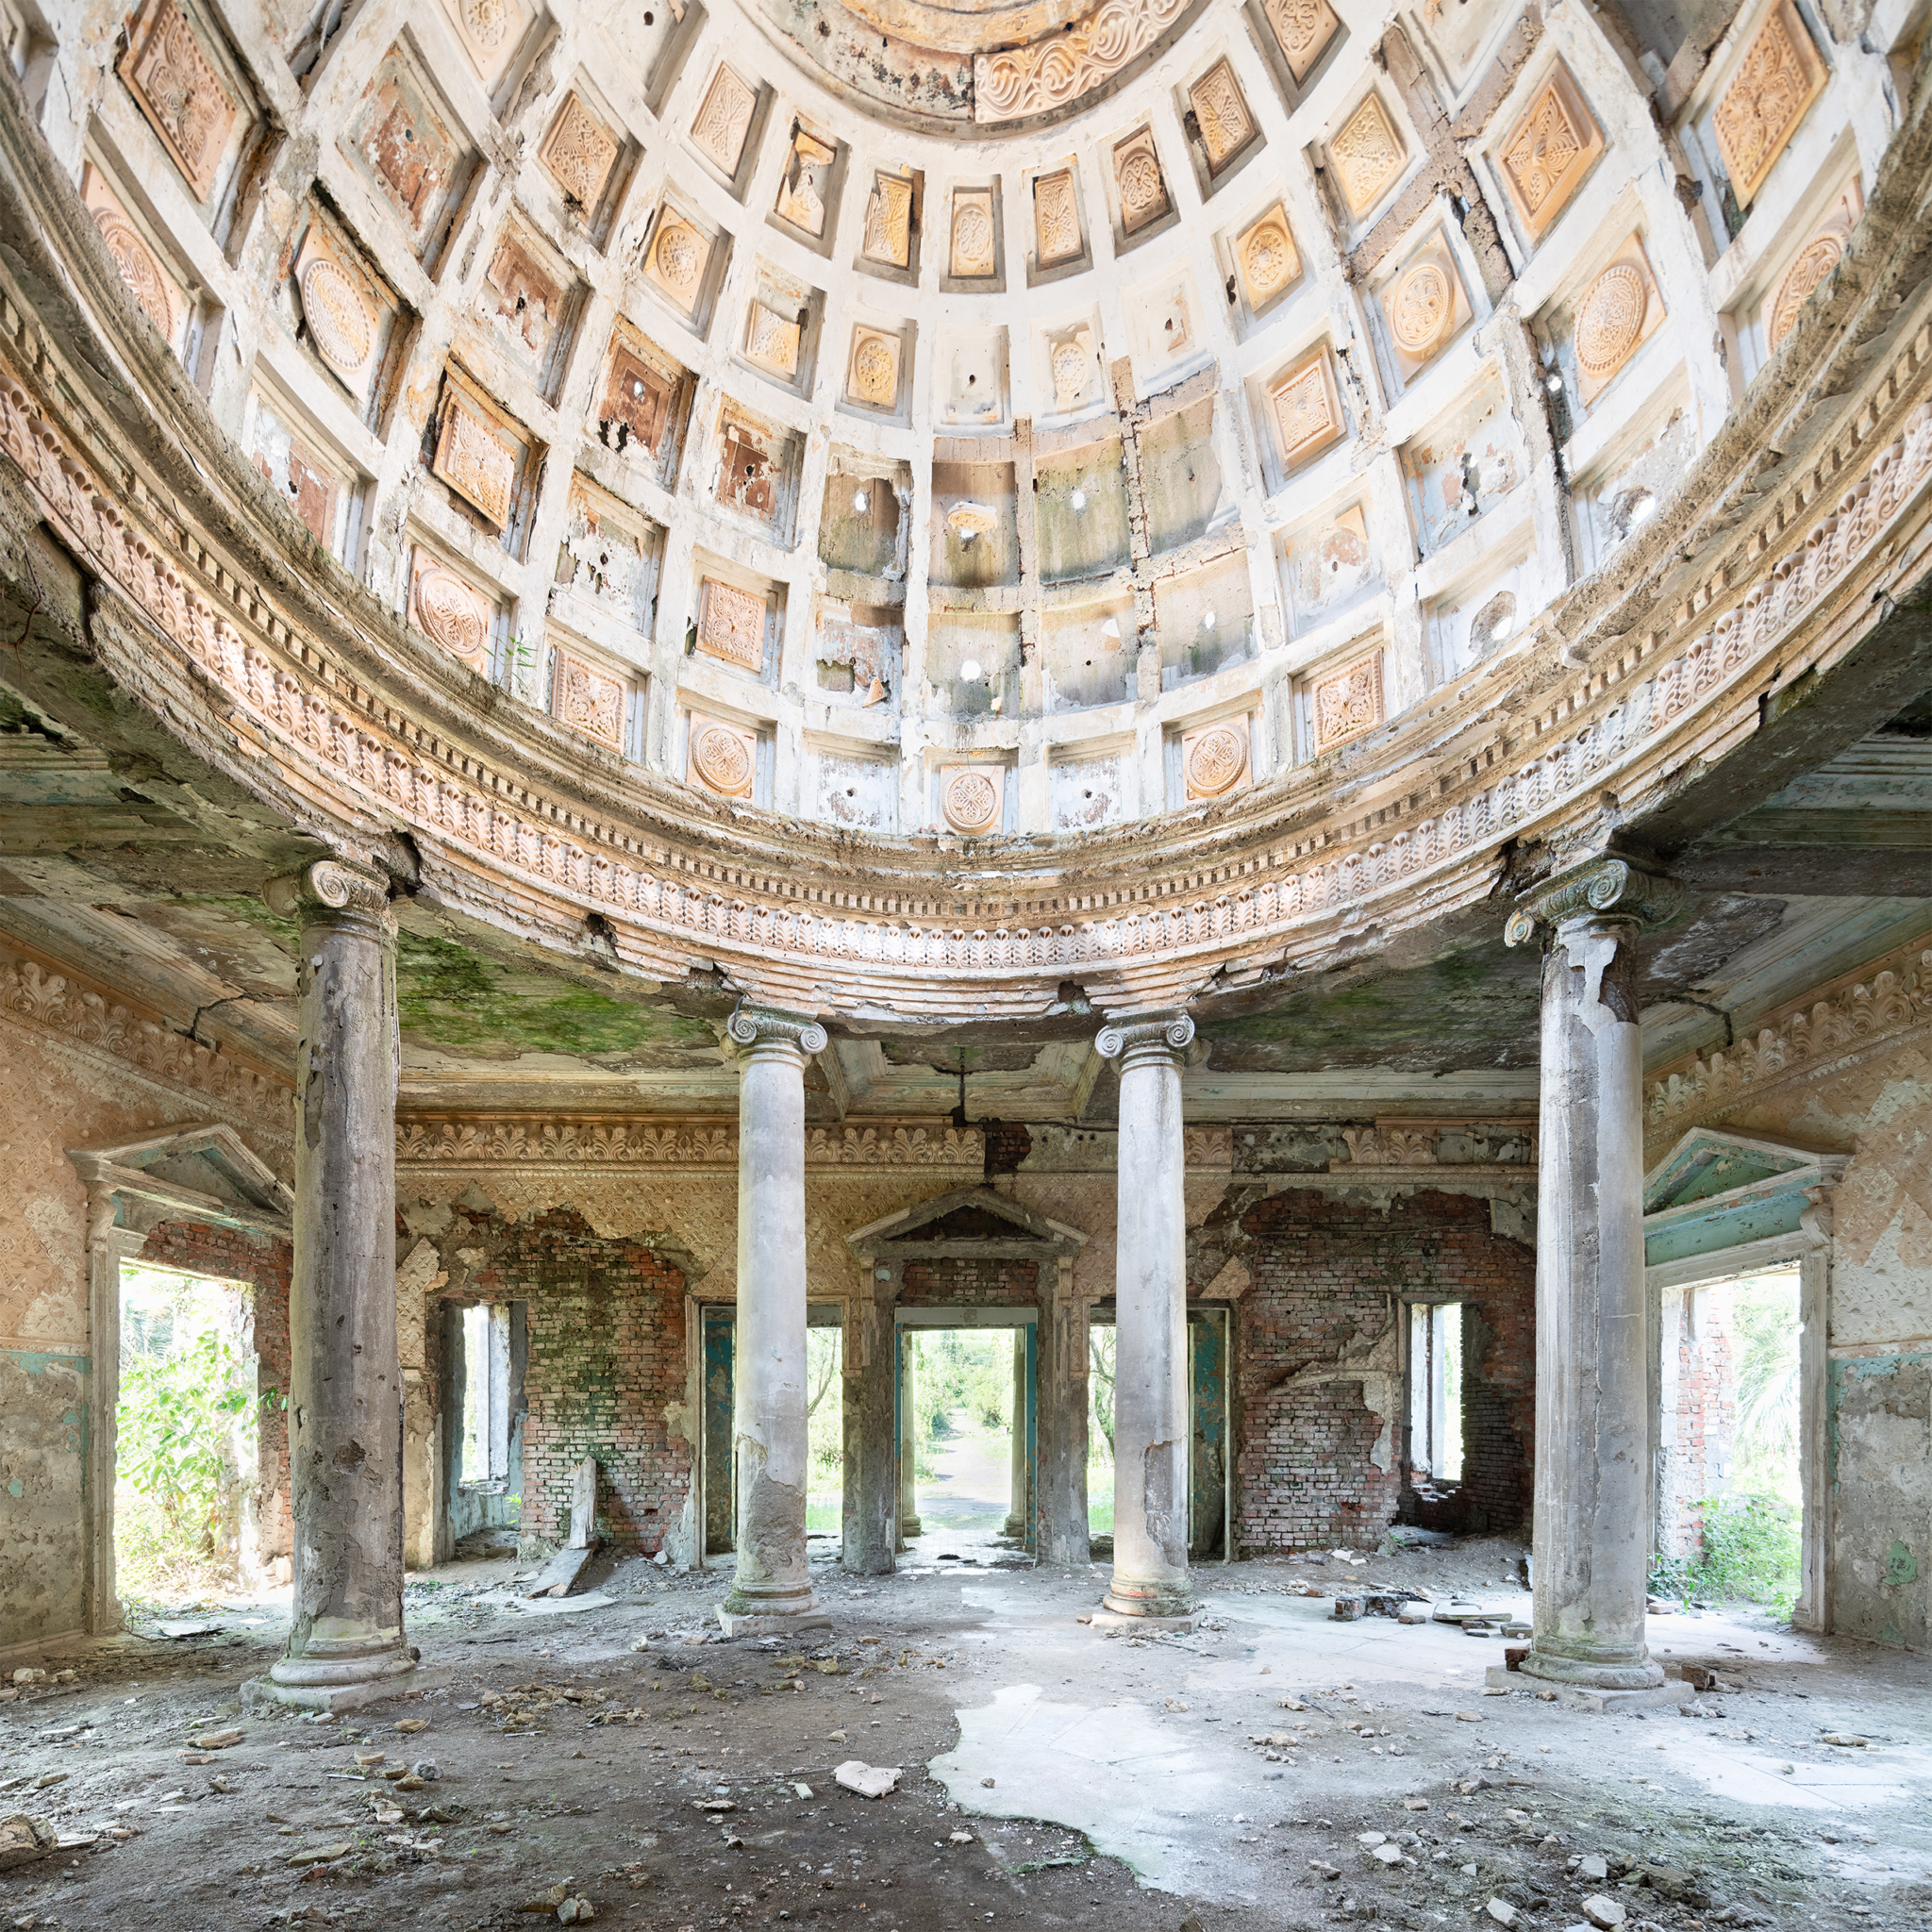 Abandoned beautiful baths with insane architecture in rural Georgia